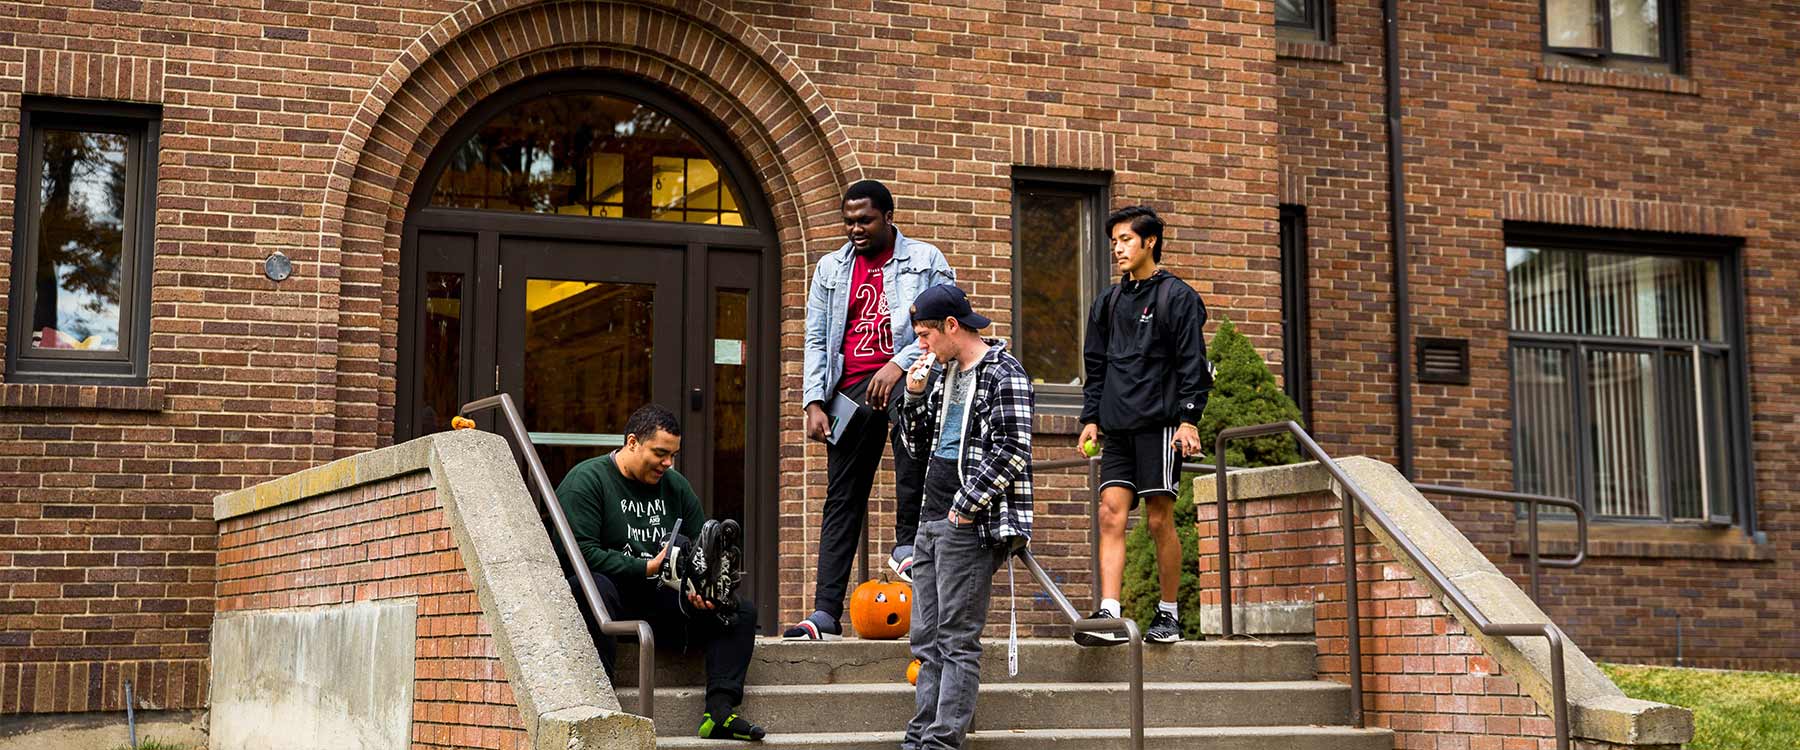 Four students gather on the steps outside of McMillan Hall. They watch as one student puts on roller blades.